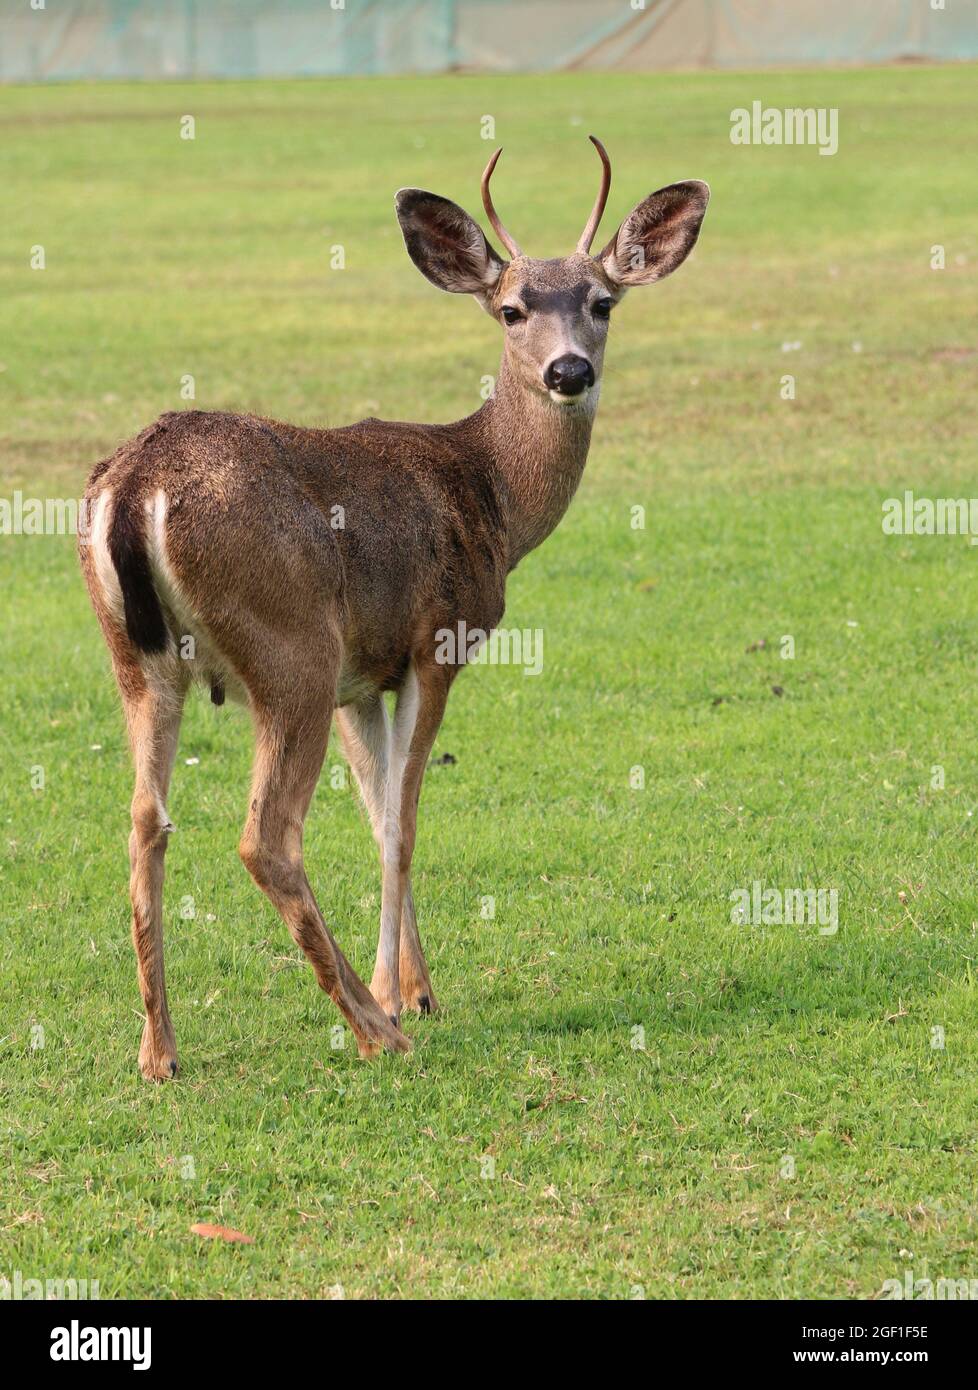 Beautiful young male deer with developing antlers standing in an open field. Stock Photo